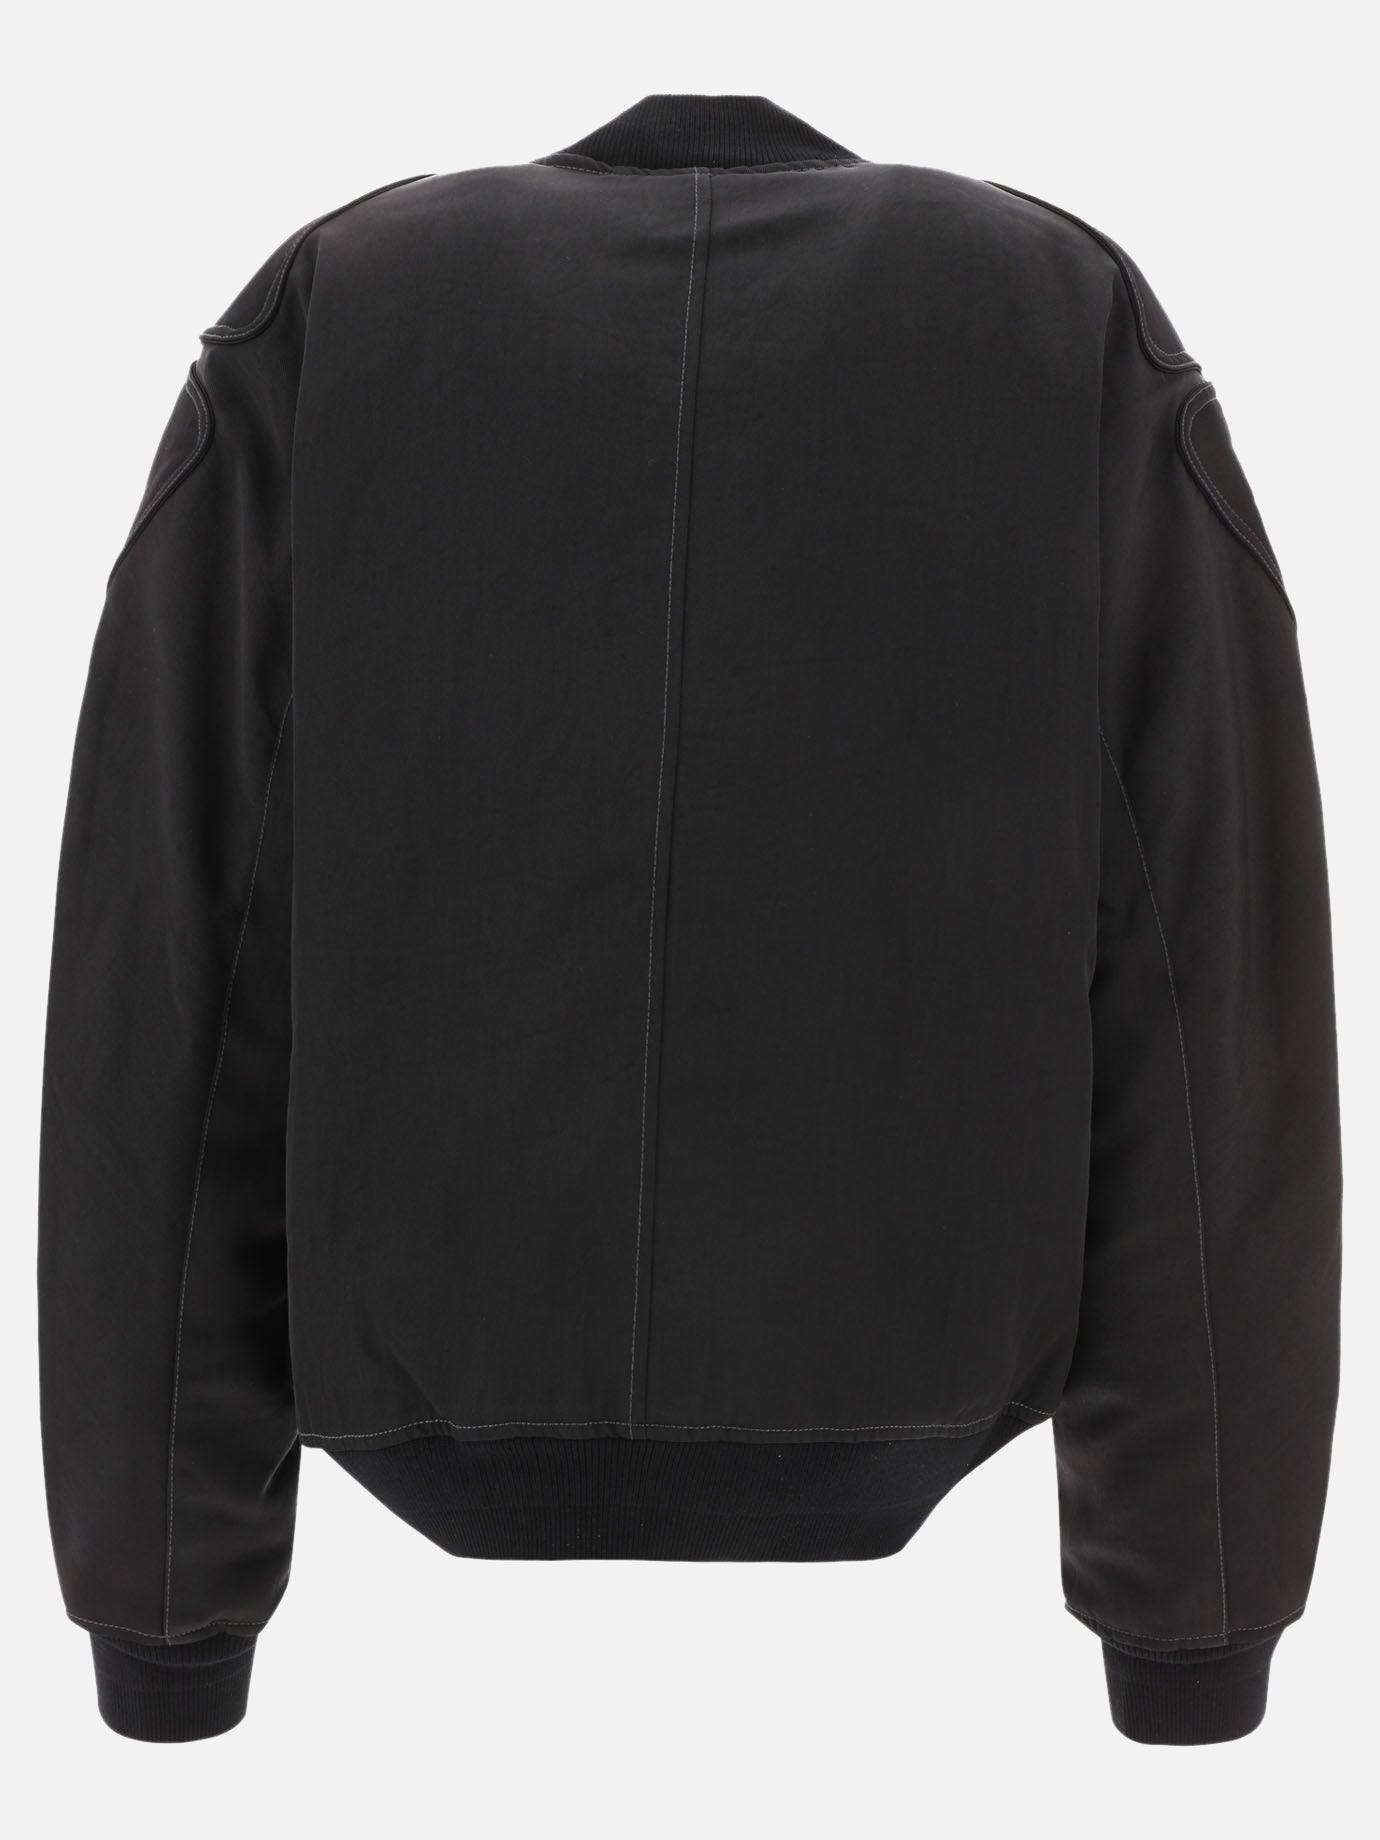 Bomber jacket with contrasting interior